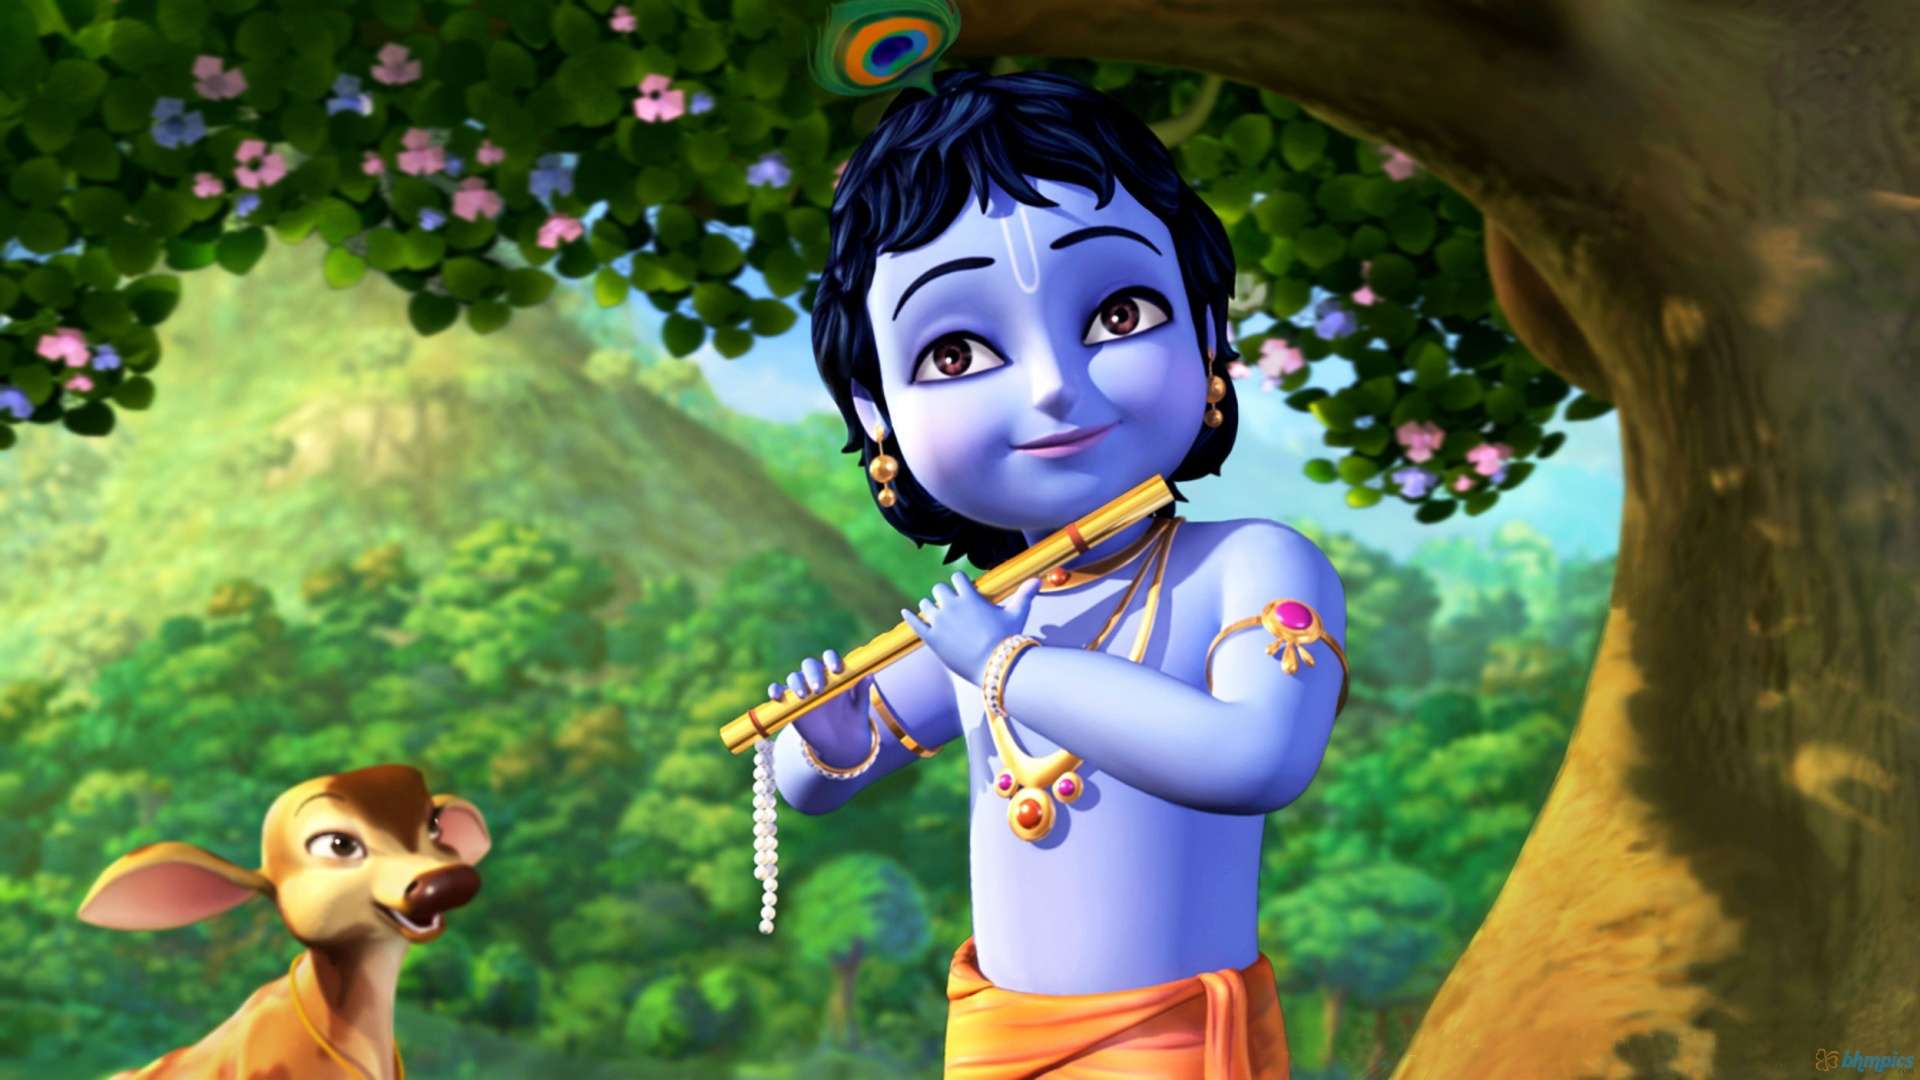 Khrisna Animation Cute Wallpapers #4524 Wallpaper | High Quality ...